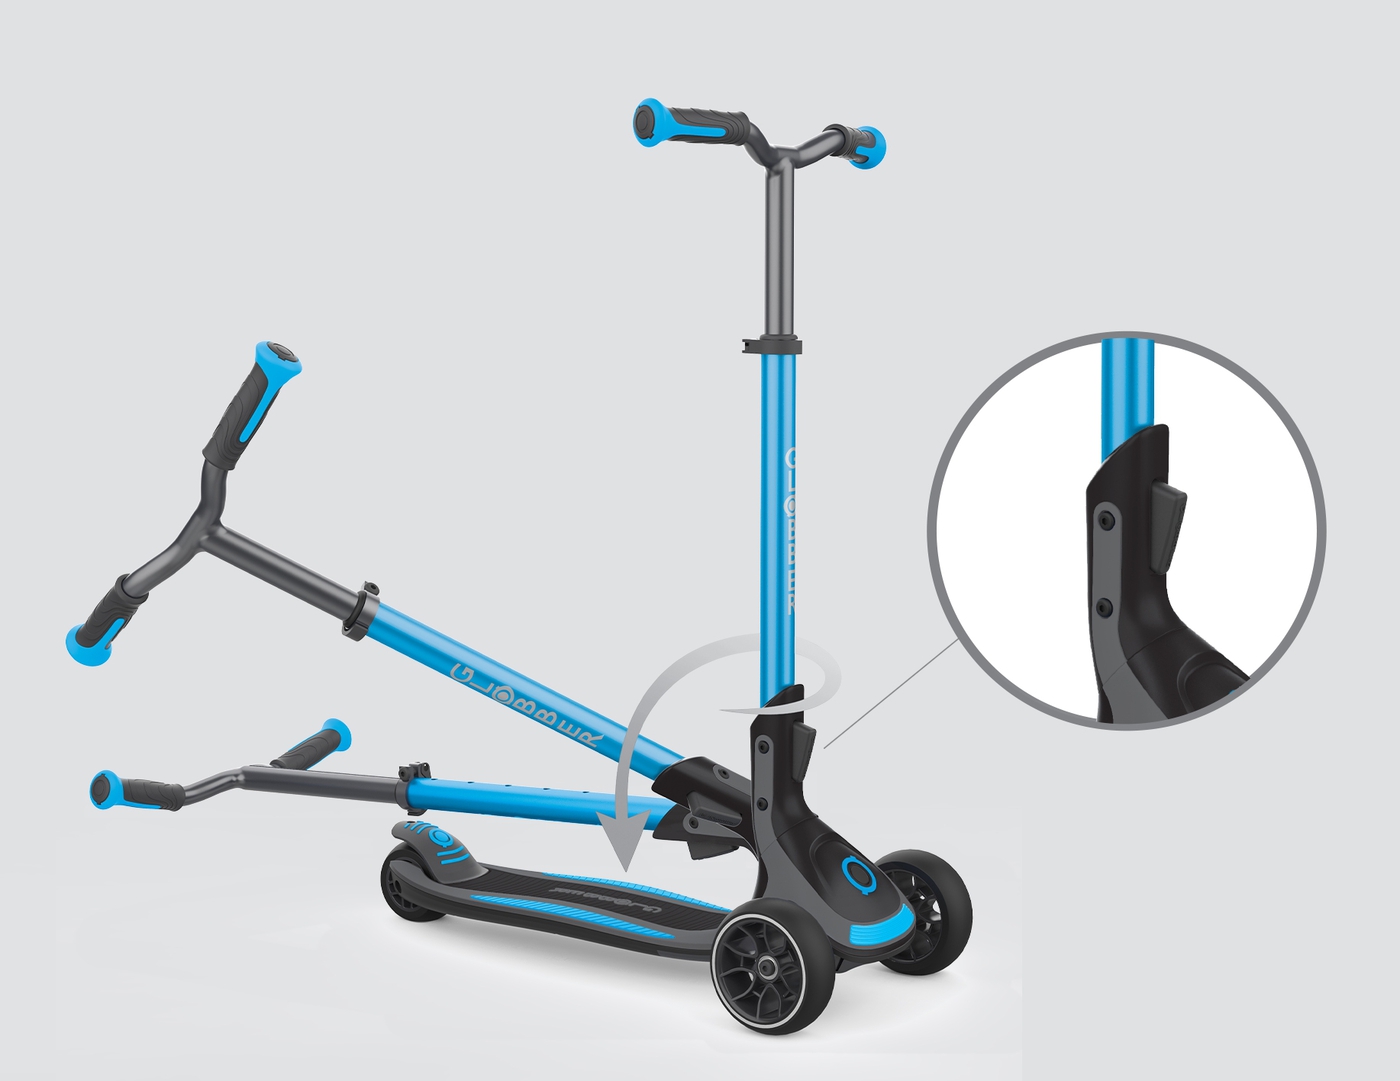 3-wheel foldable scooter for kids, teens & adults